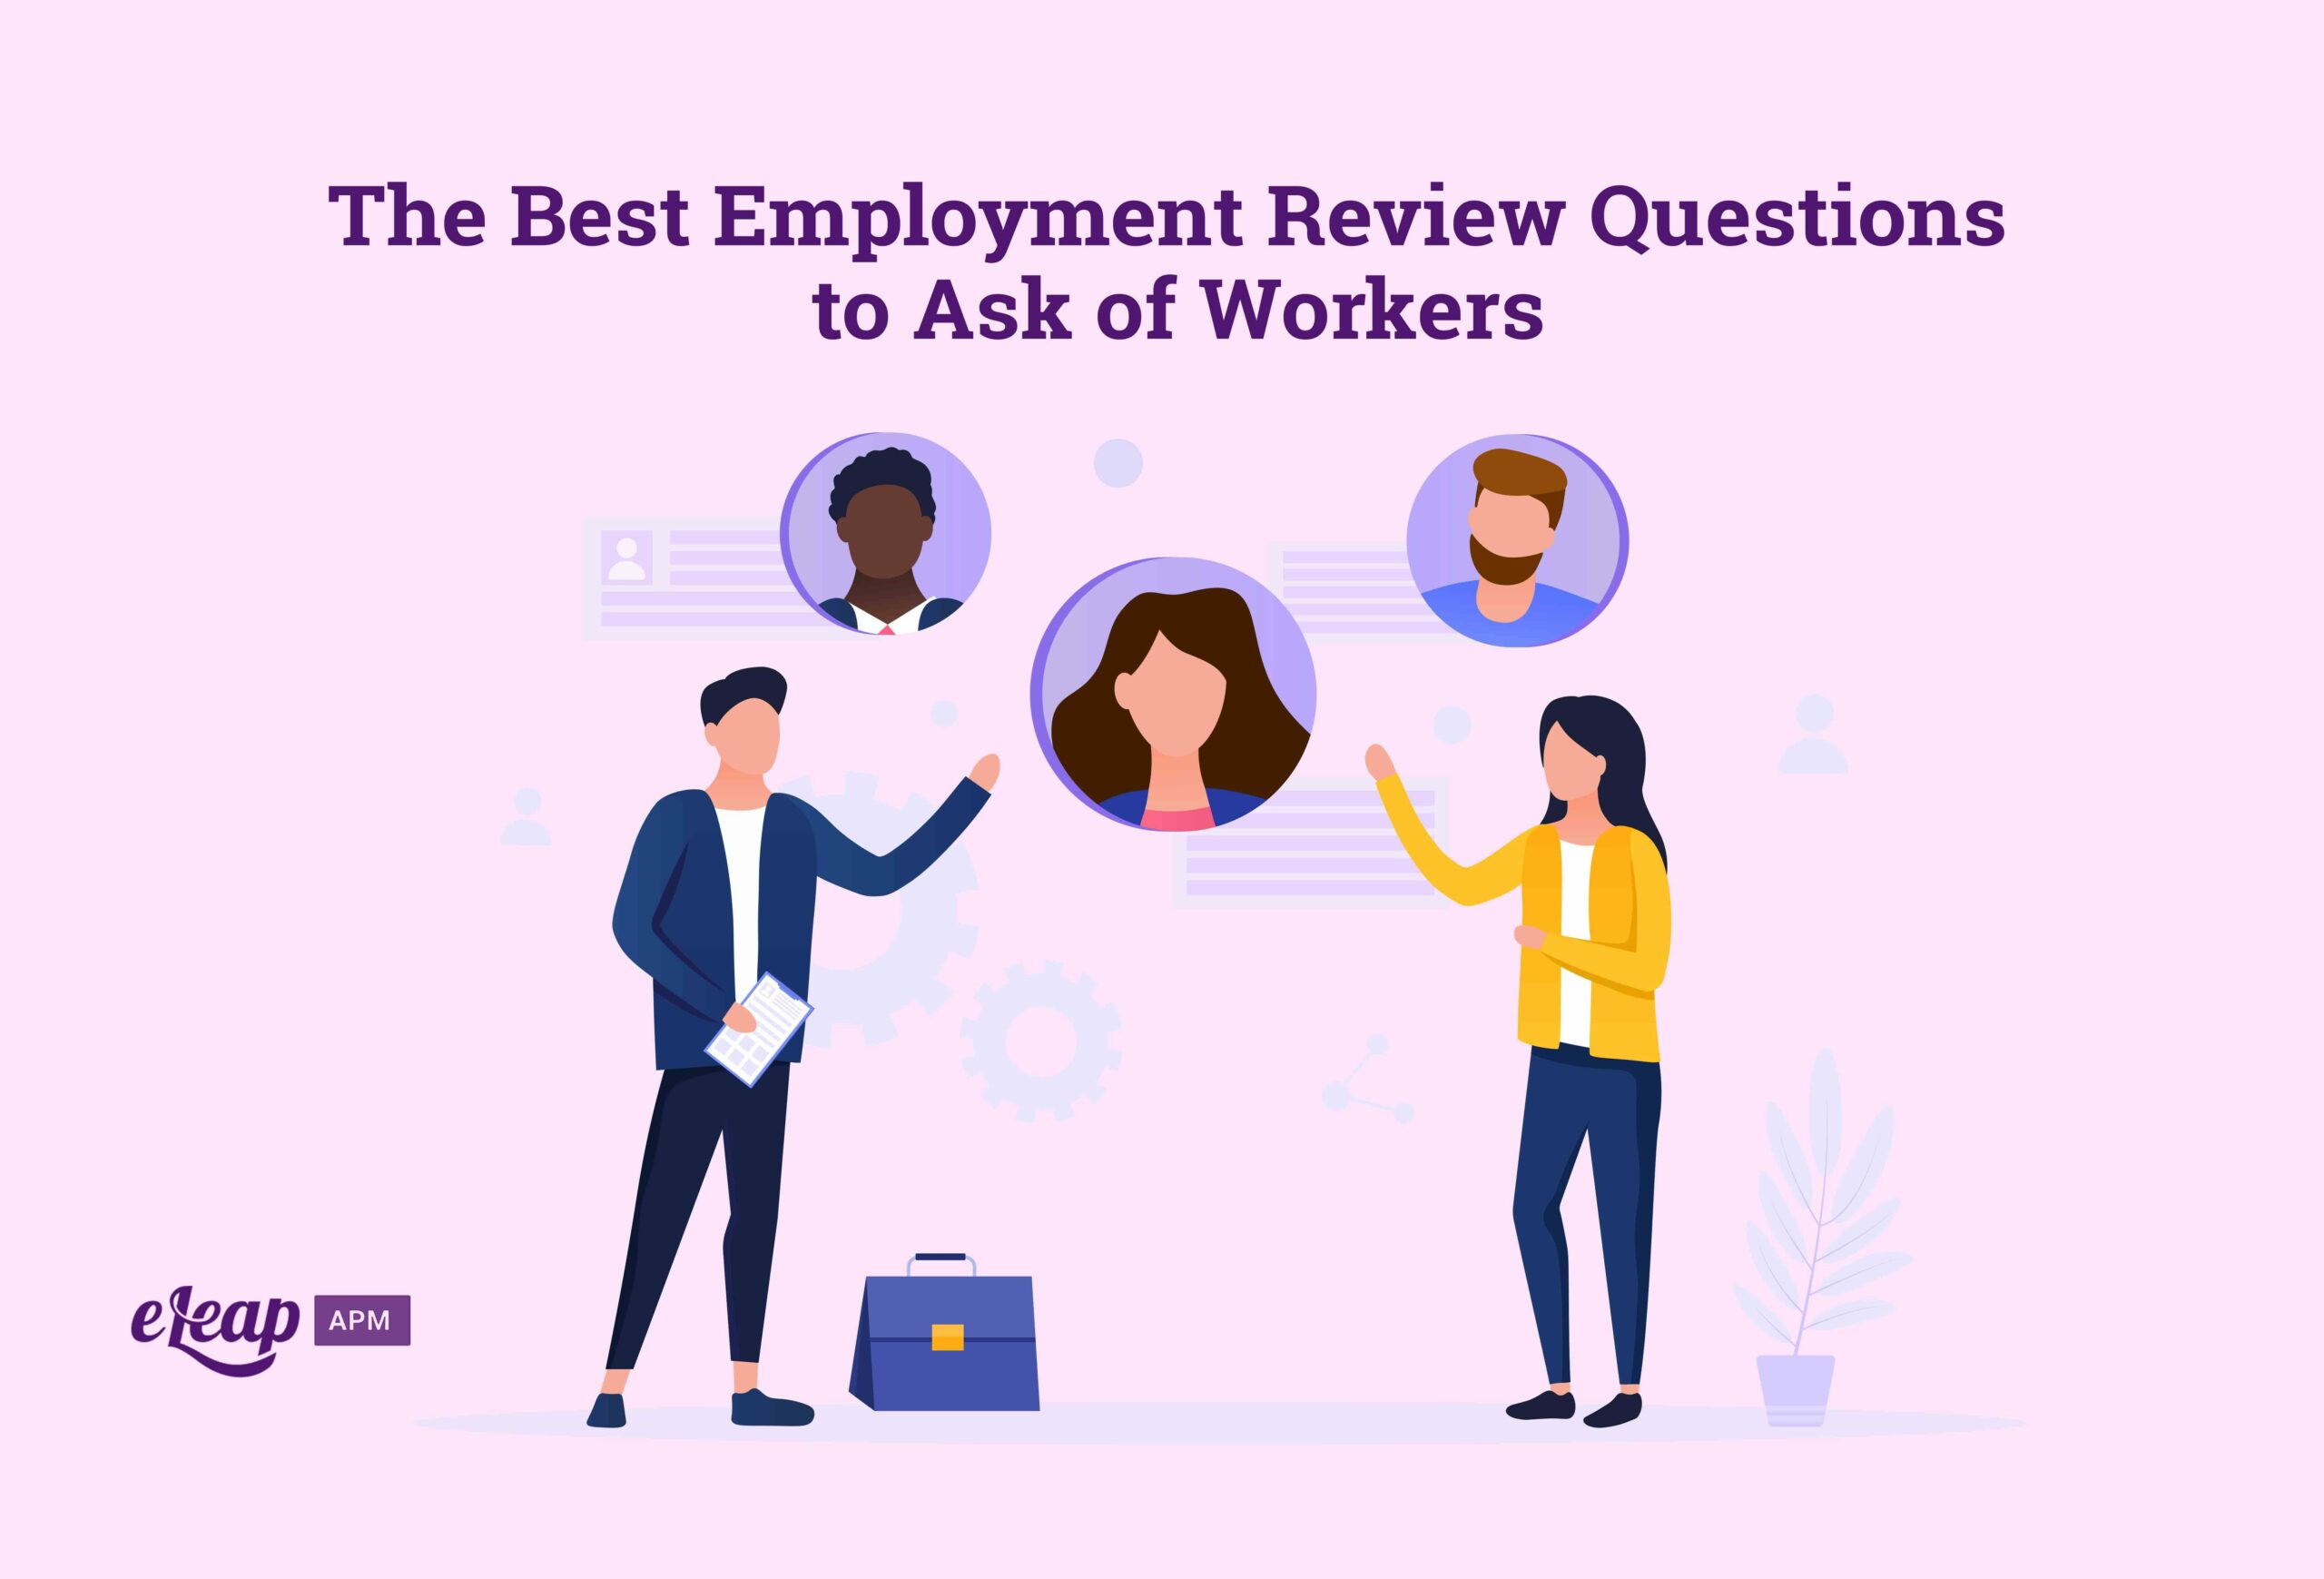 The Best Employment Review Questions to Ask of Workers